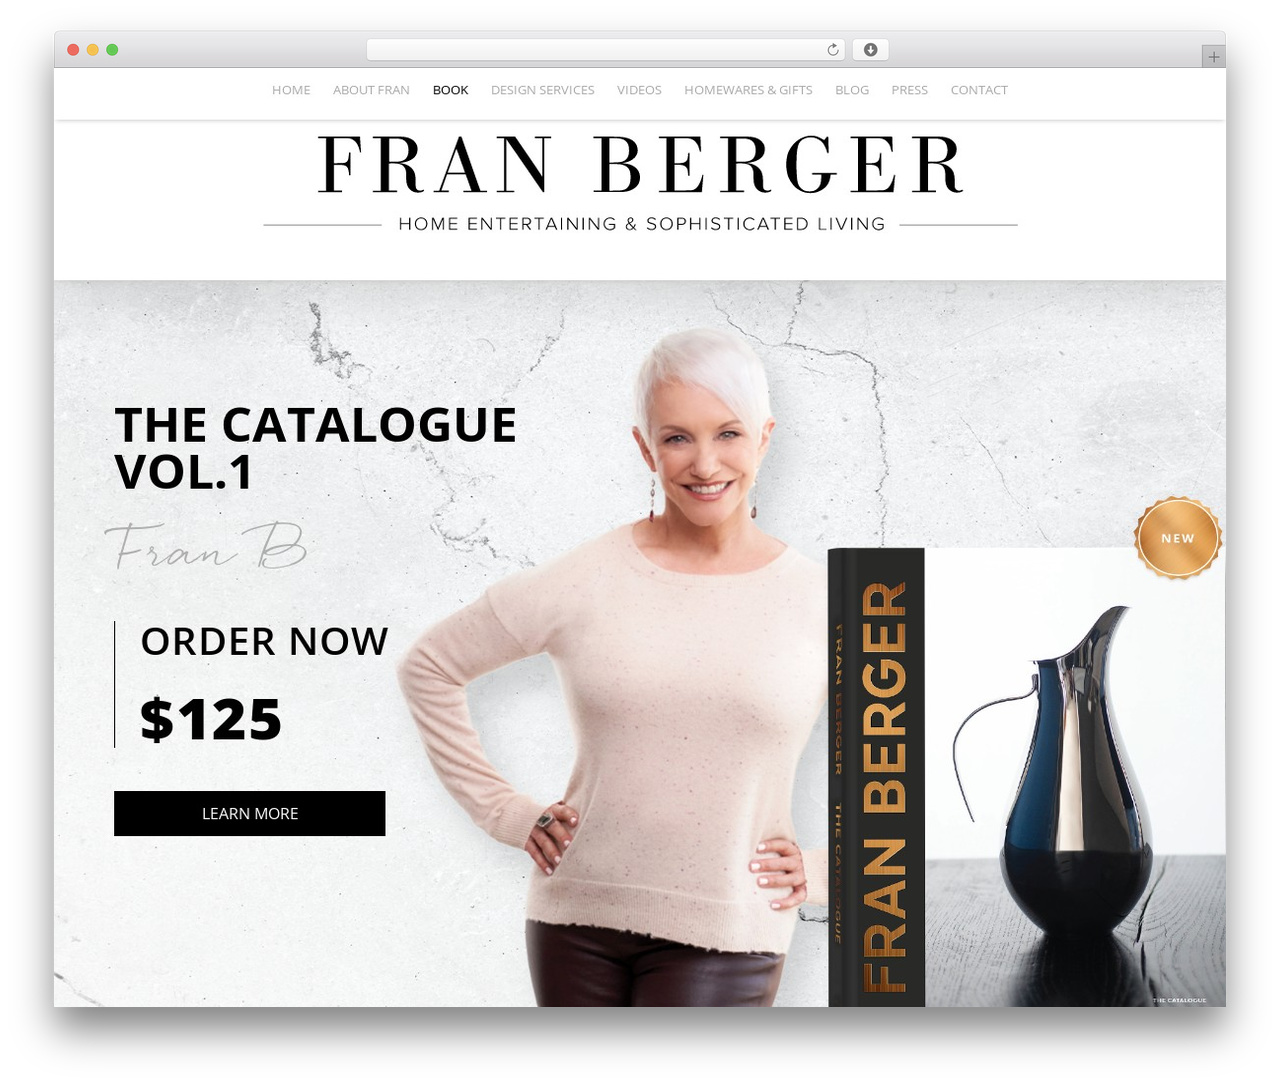 WP-Forge theme free download - franberger.com